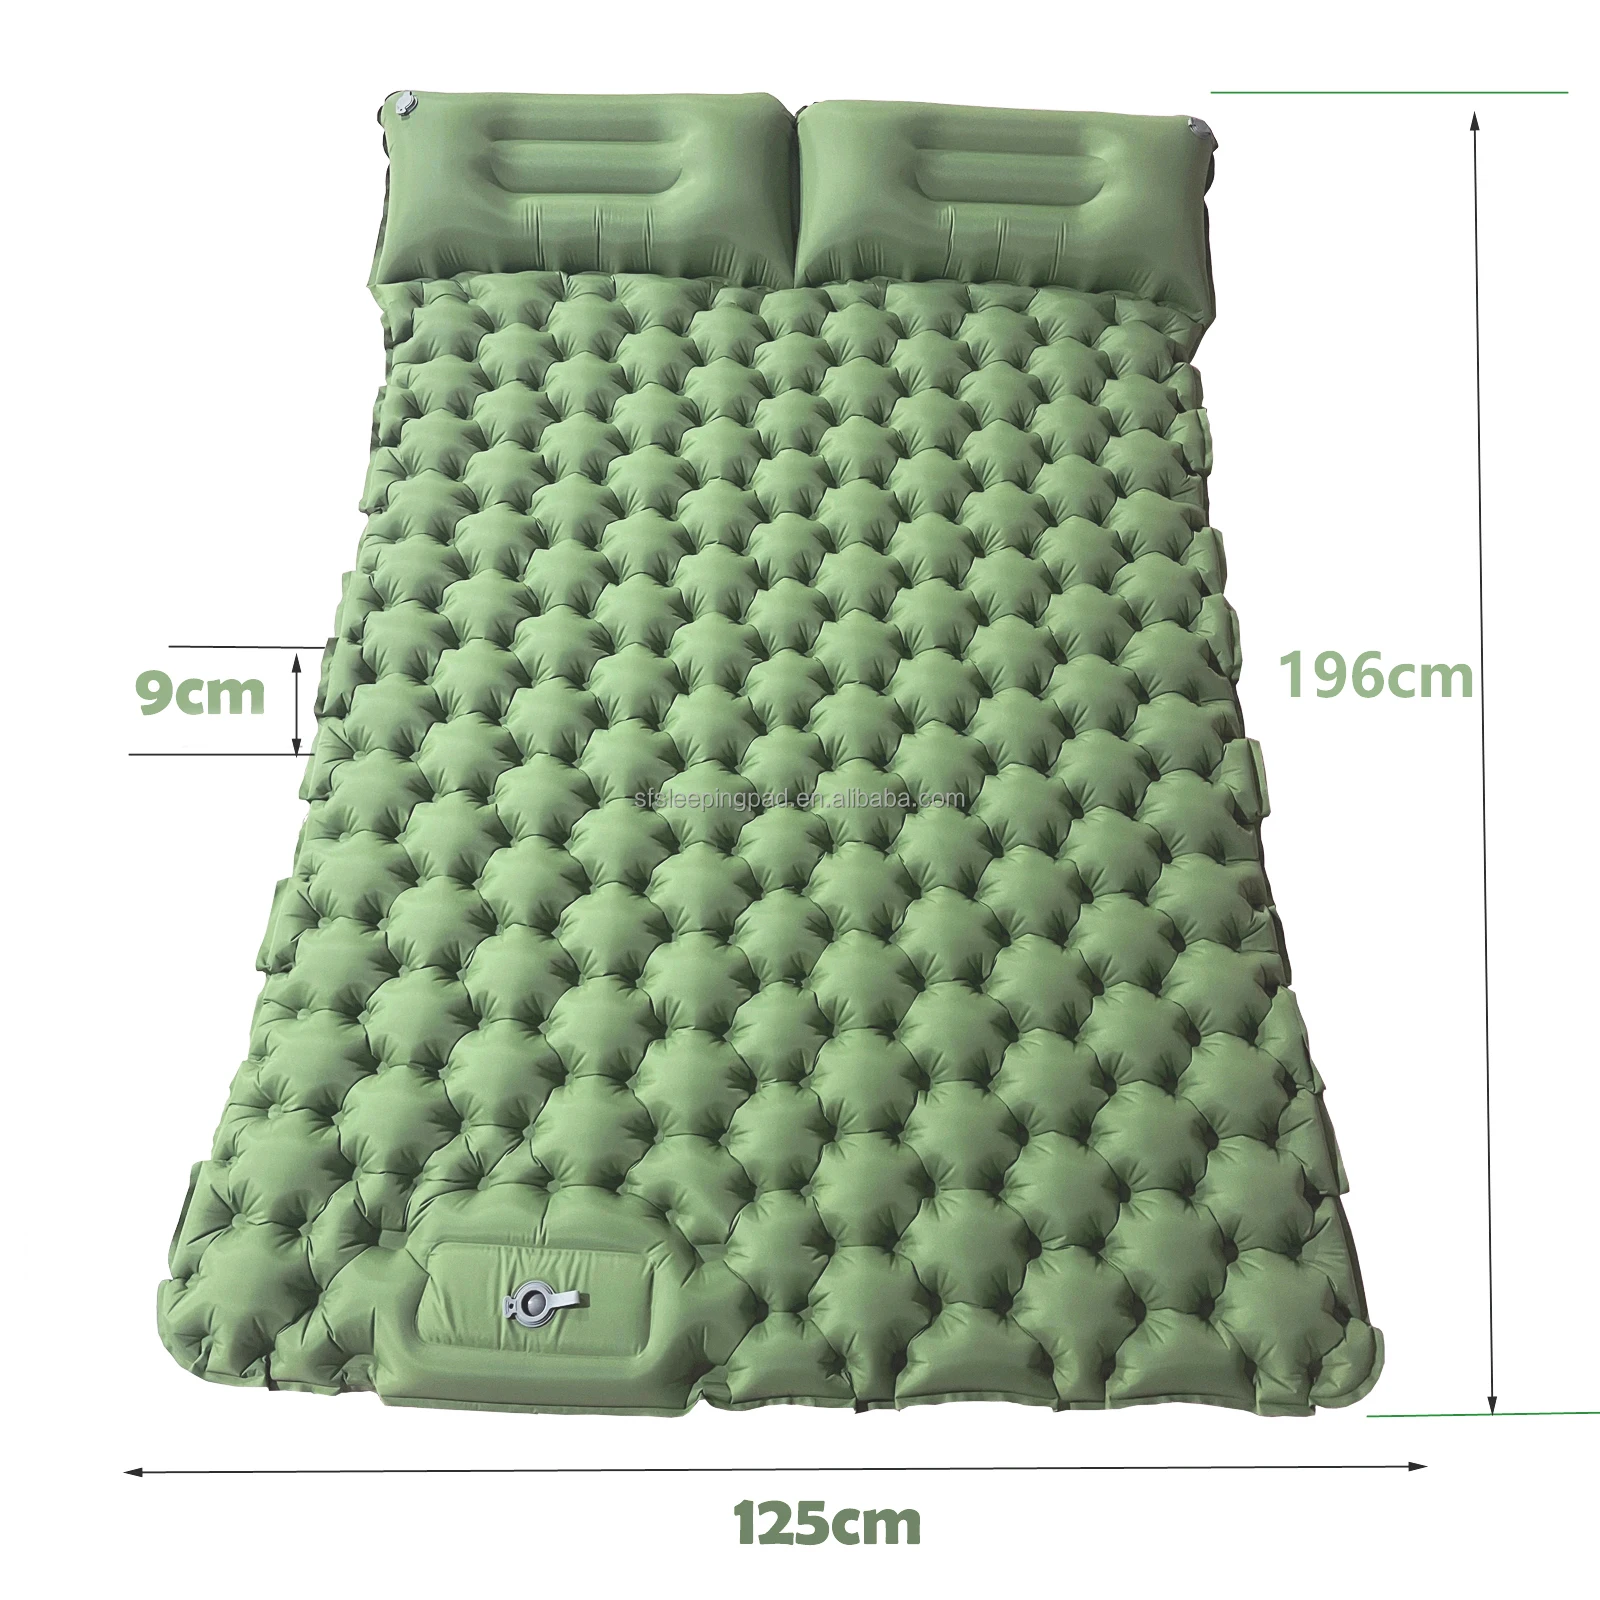 

NEW Design Double Person Inflatable Outdoor Camping Sleeping Mat Pad Foot Pump Self Inflate Air Mattress, Multiple colour and accept customization